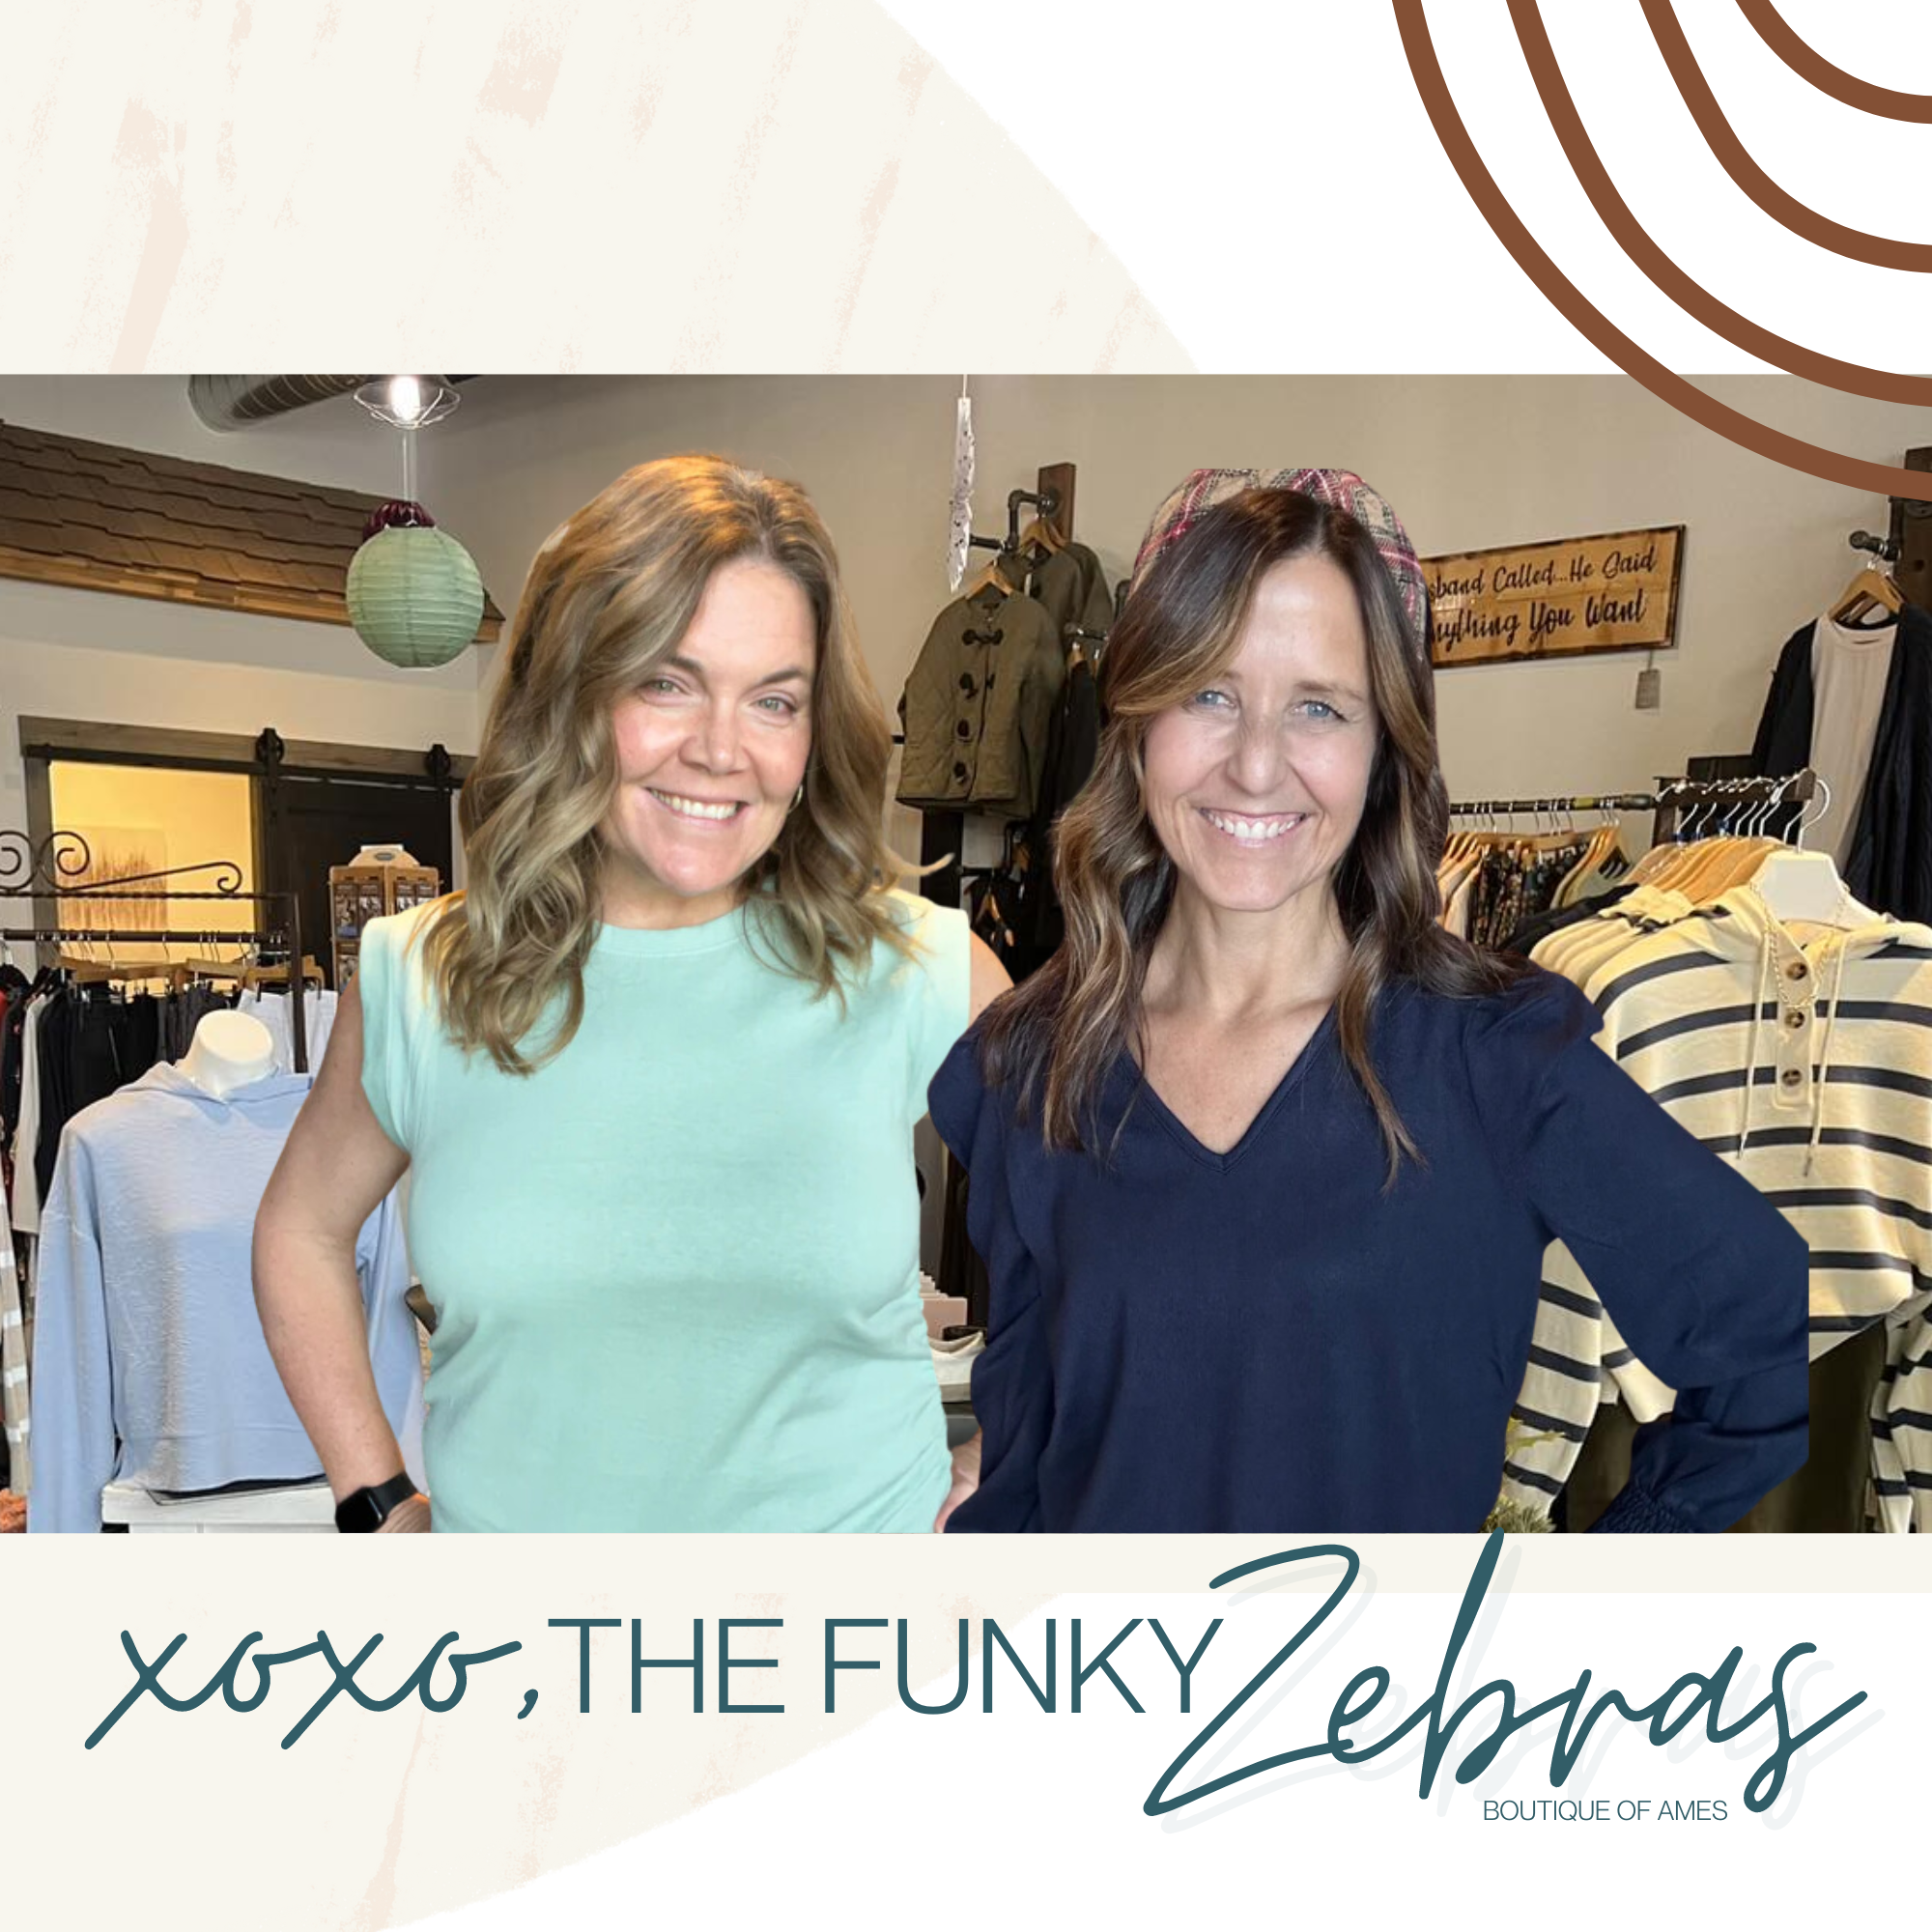 Shop our Curated Collections | The Funky Zebras Boutique of Ames, IA